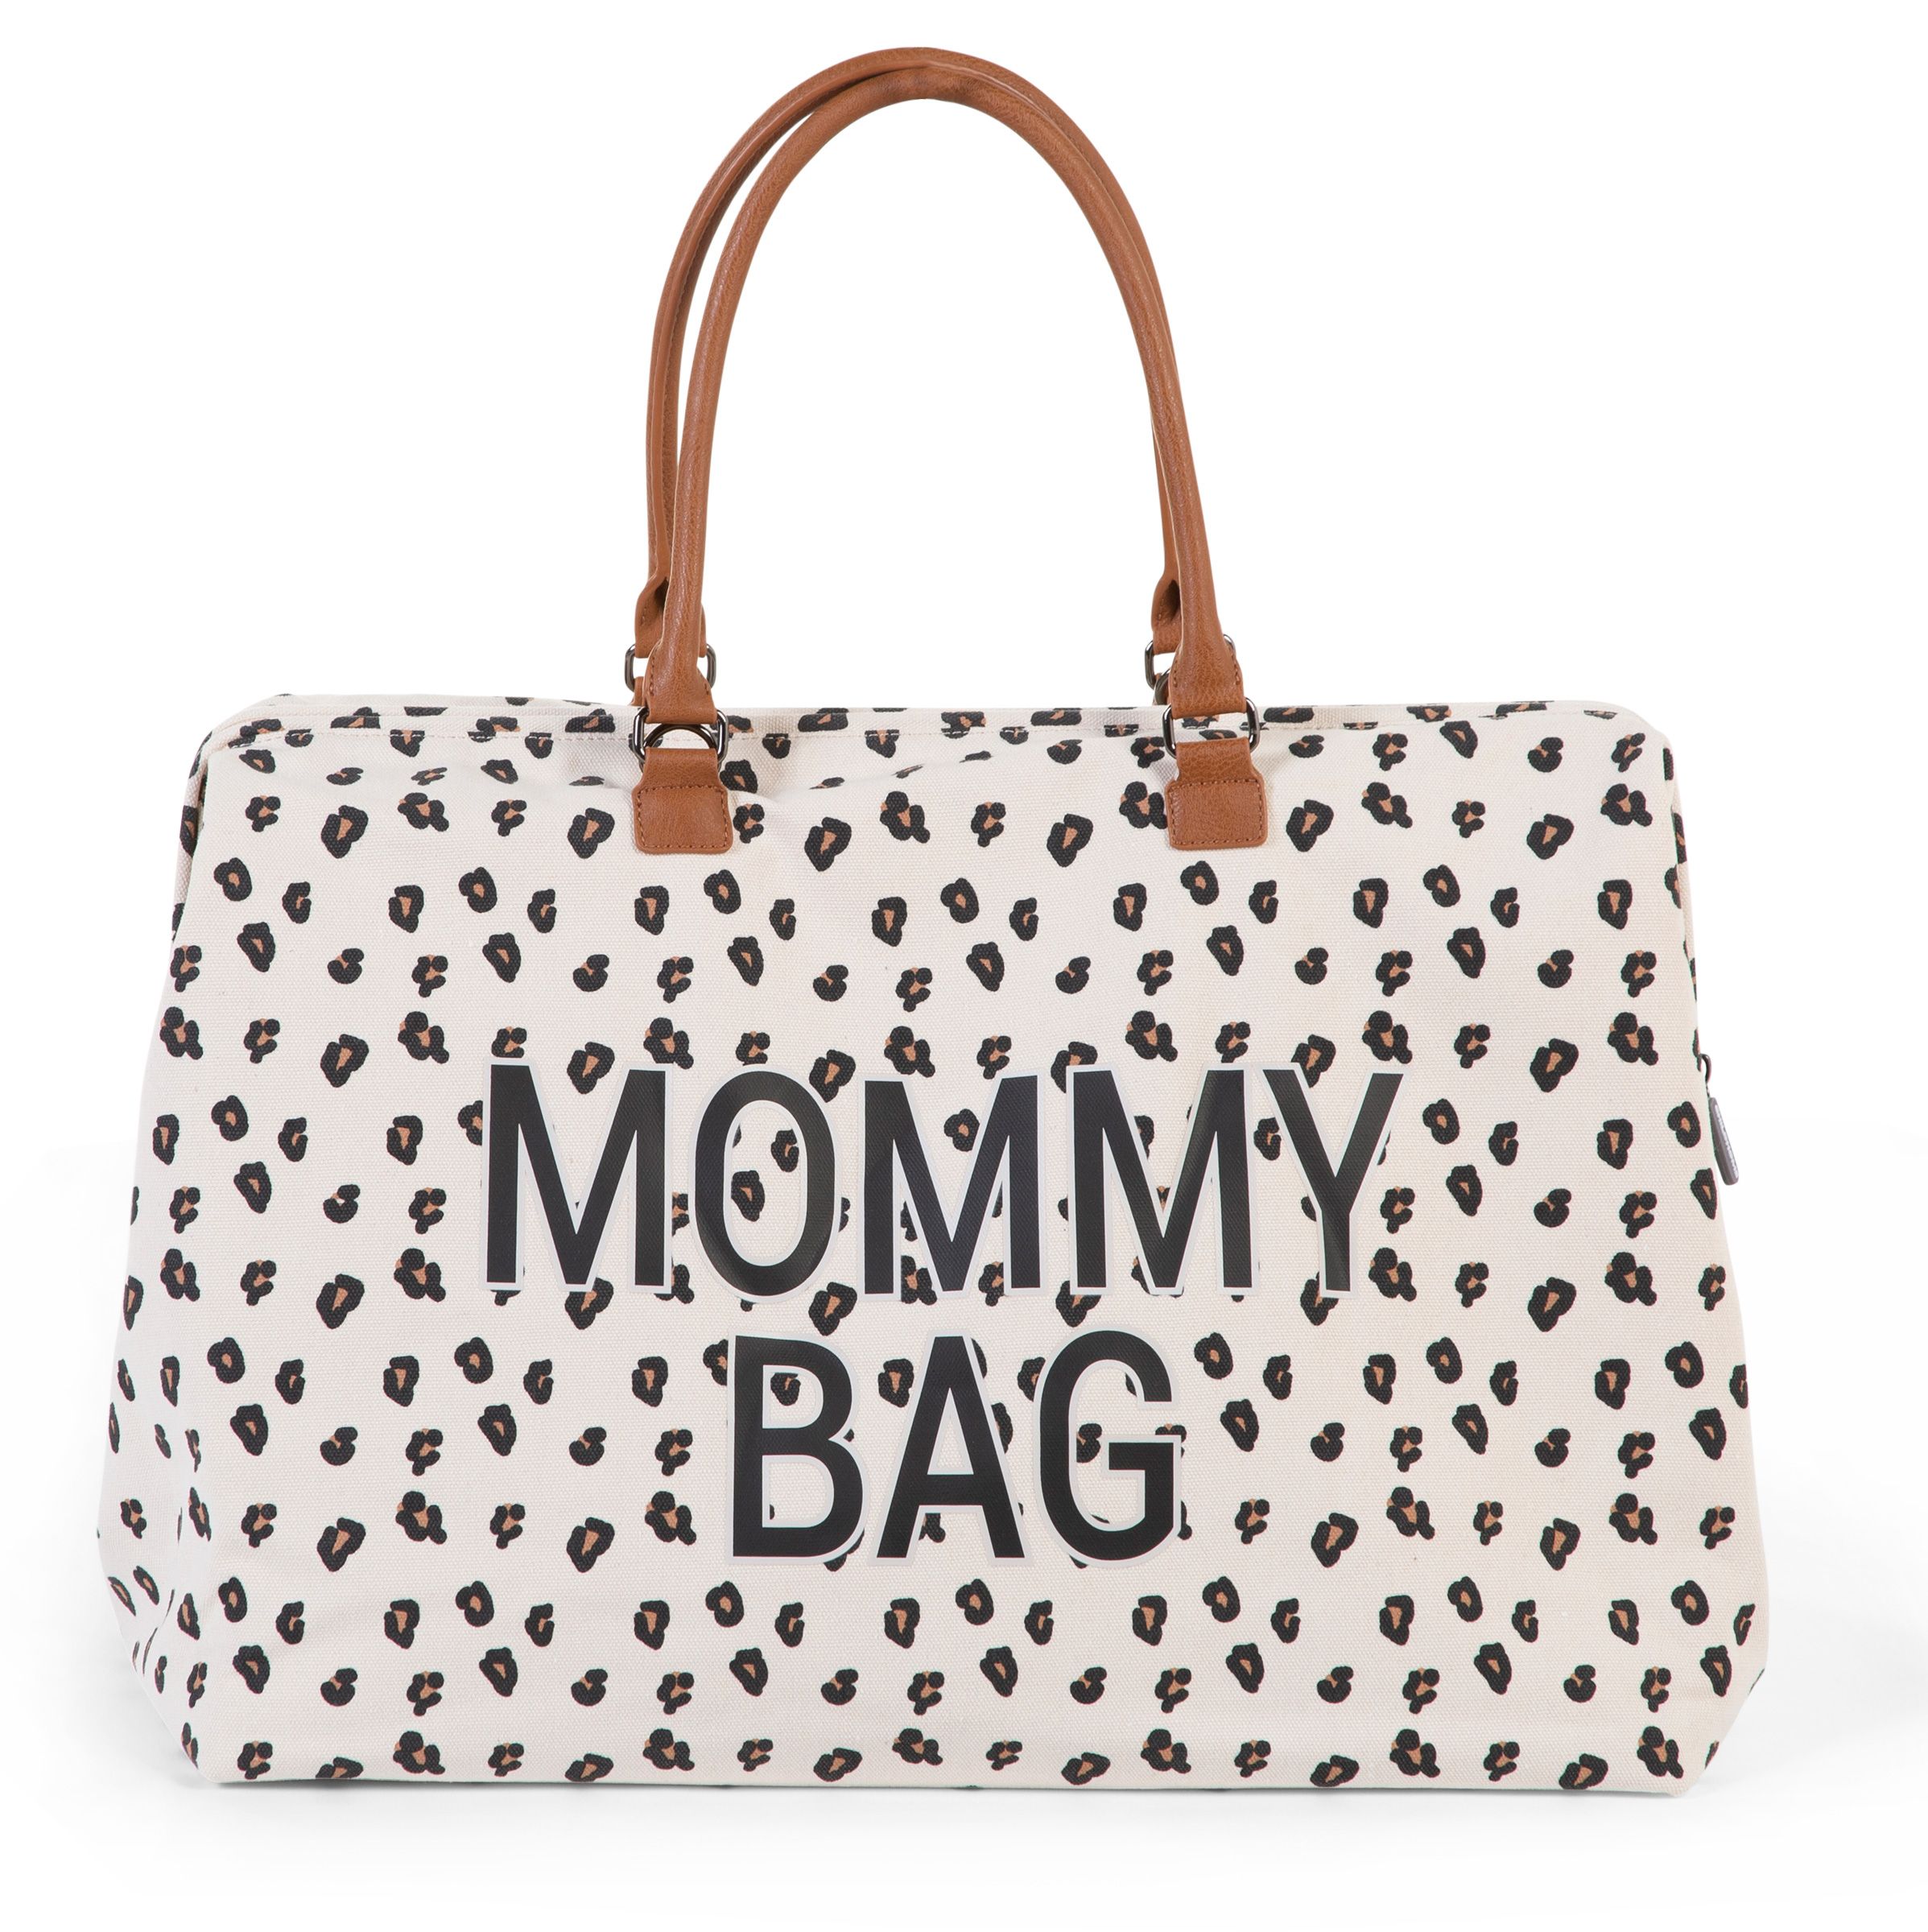 Childhome Mommy Bag 